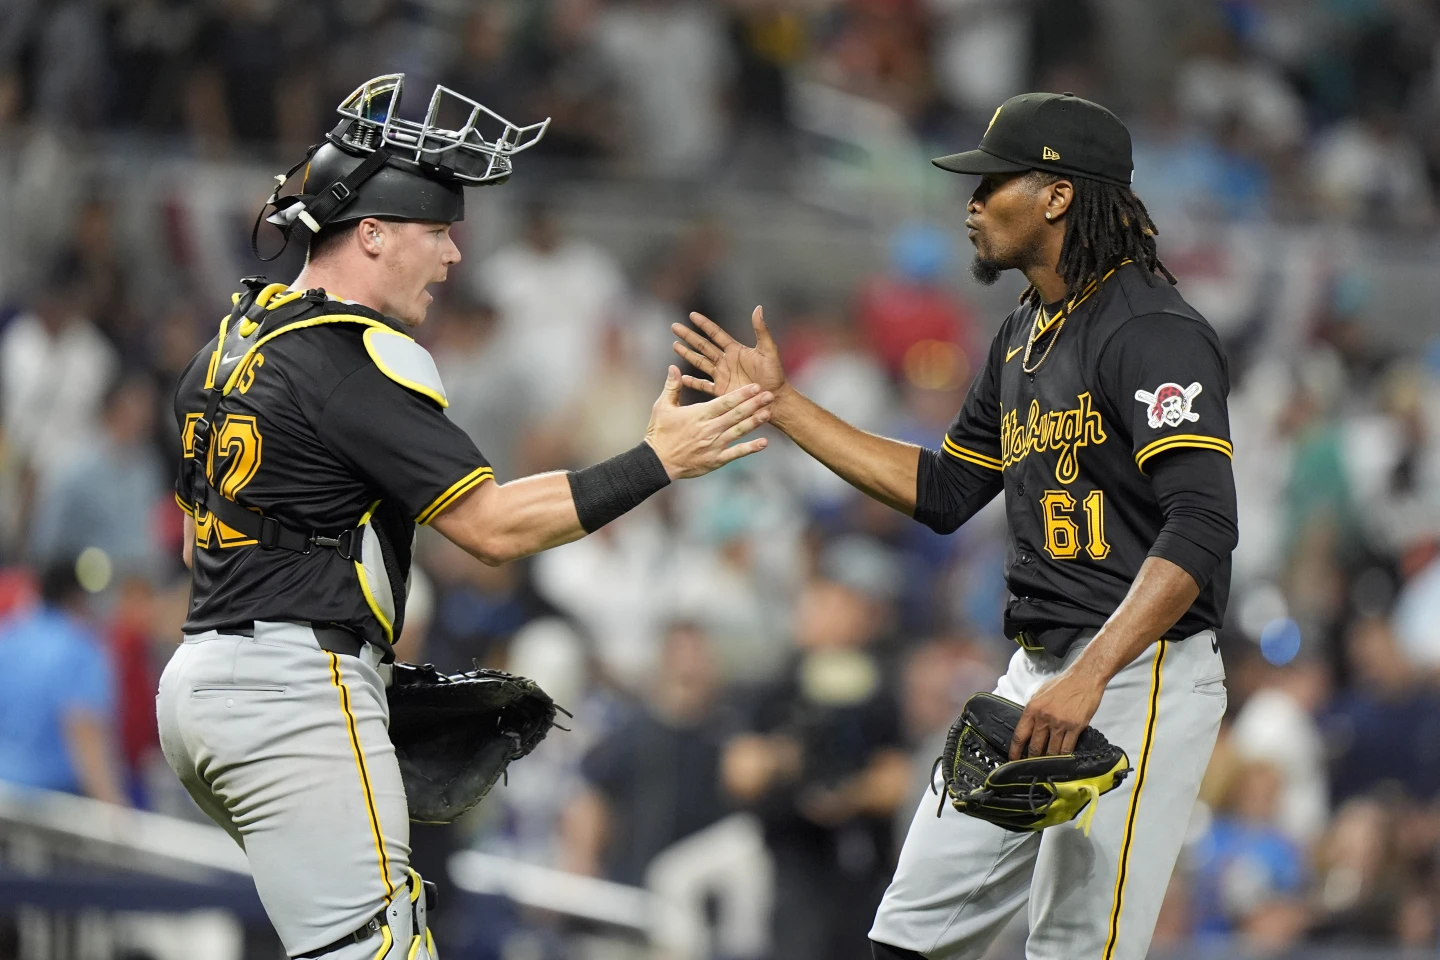 Triolo delivers an RBI single in the 12th inning, Pittsburgh's bullpen excels as Pittsburgh Pirates edge out Marlins 6-5